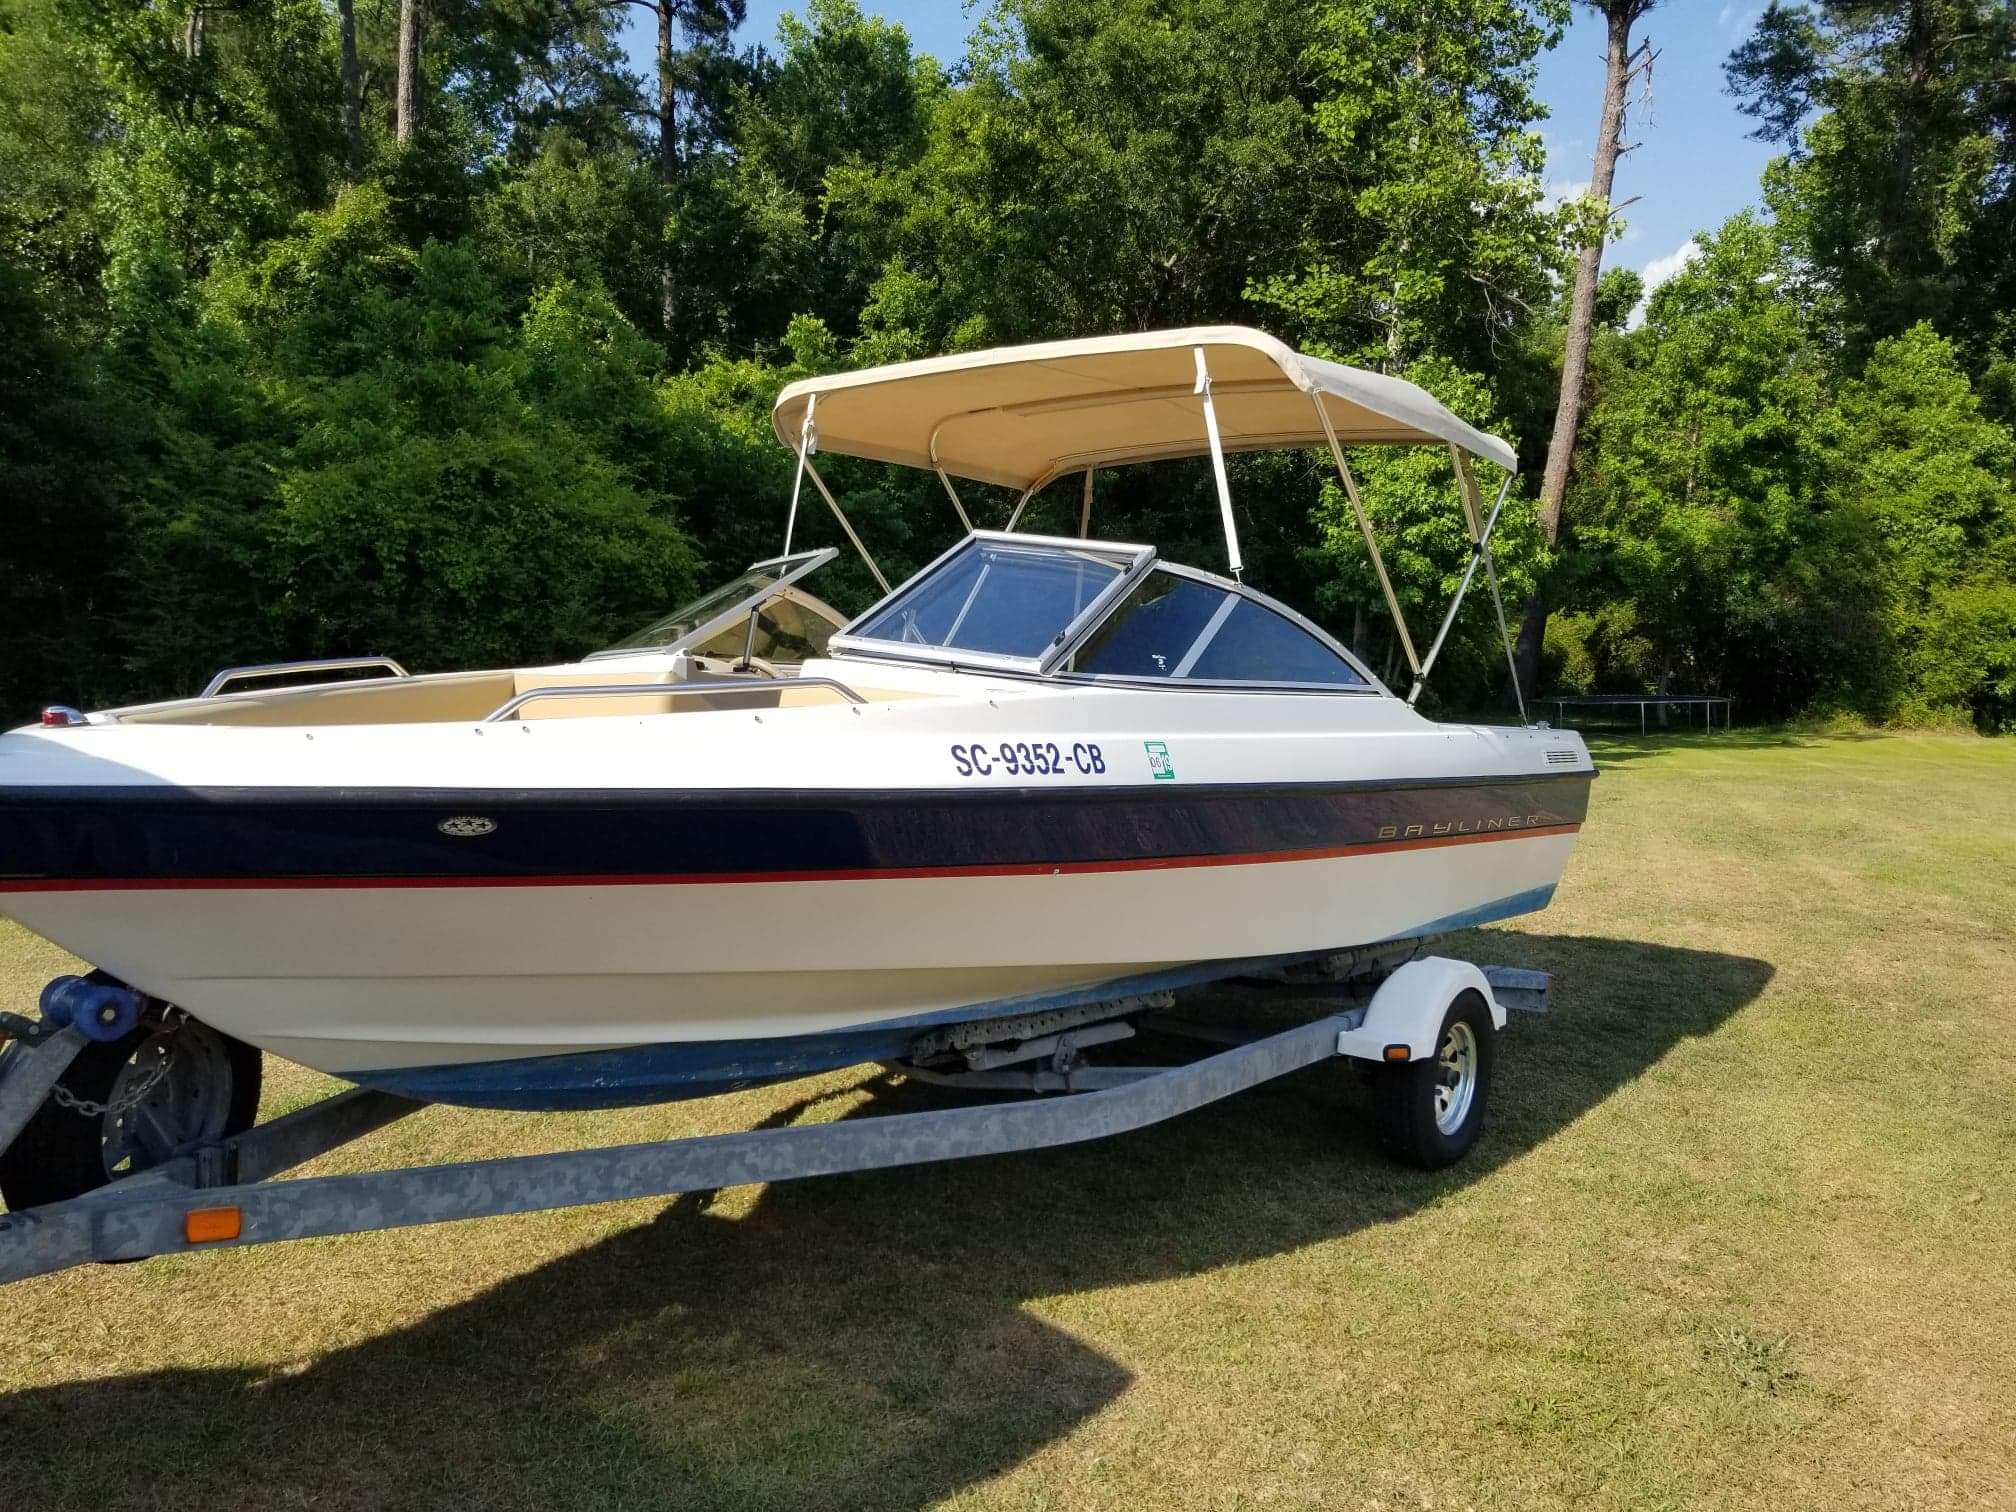 2004 19 foot Other Bayliner Power boat for sale in Myrtle Beach, SC - image 5 